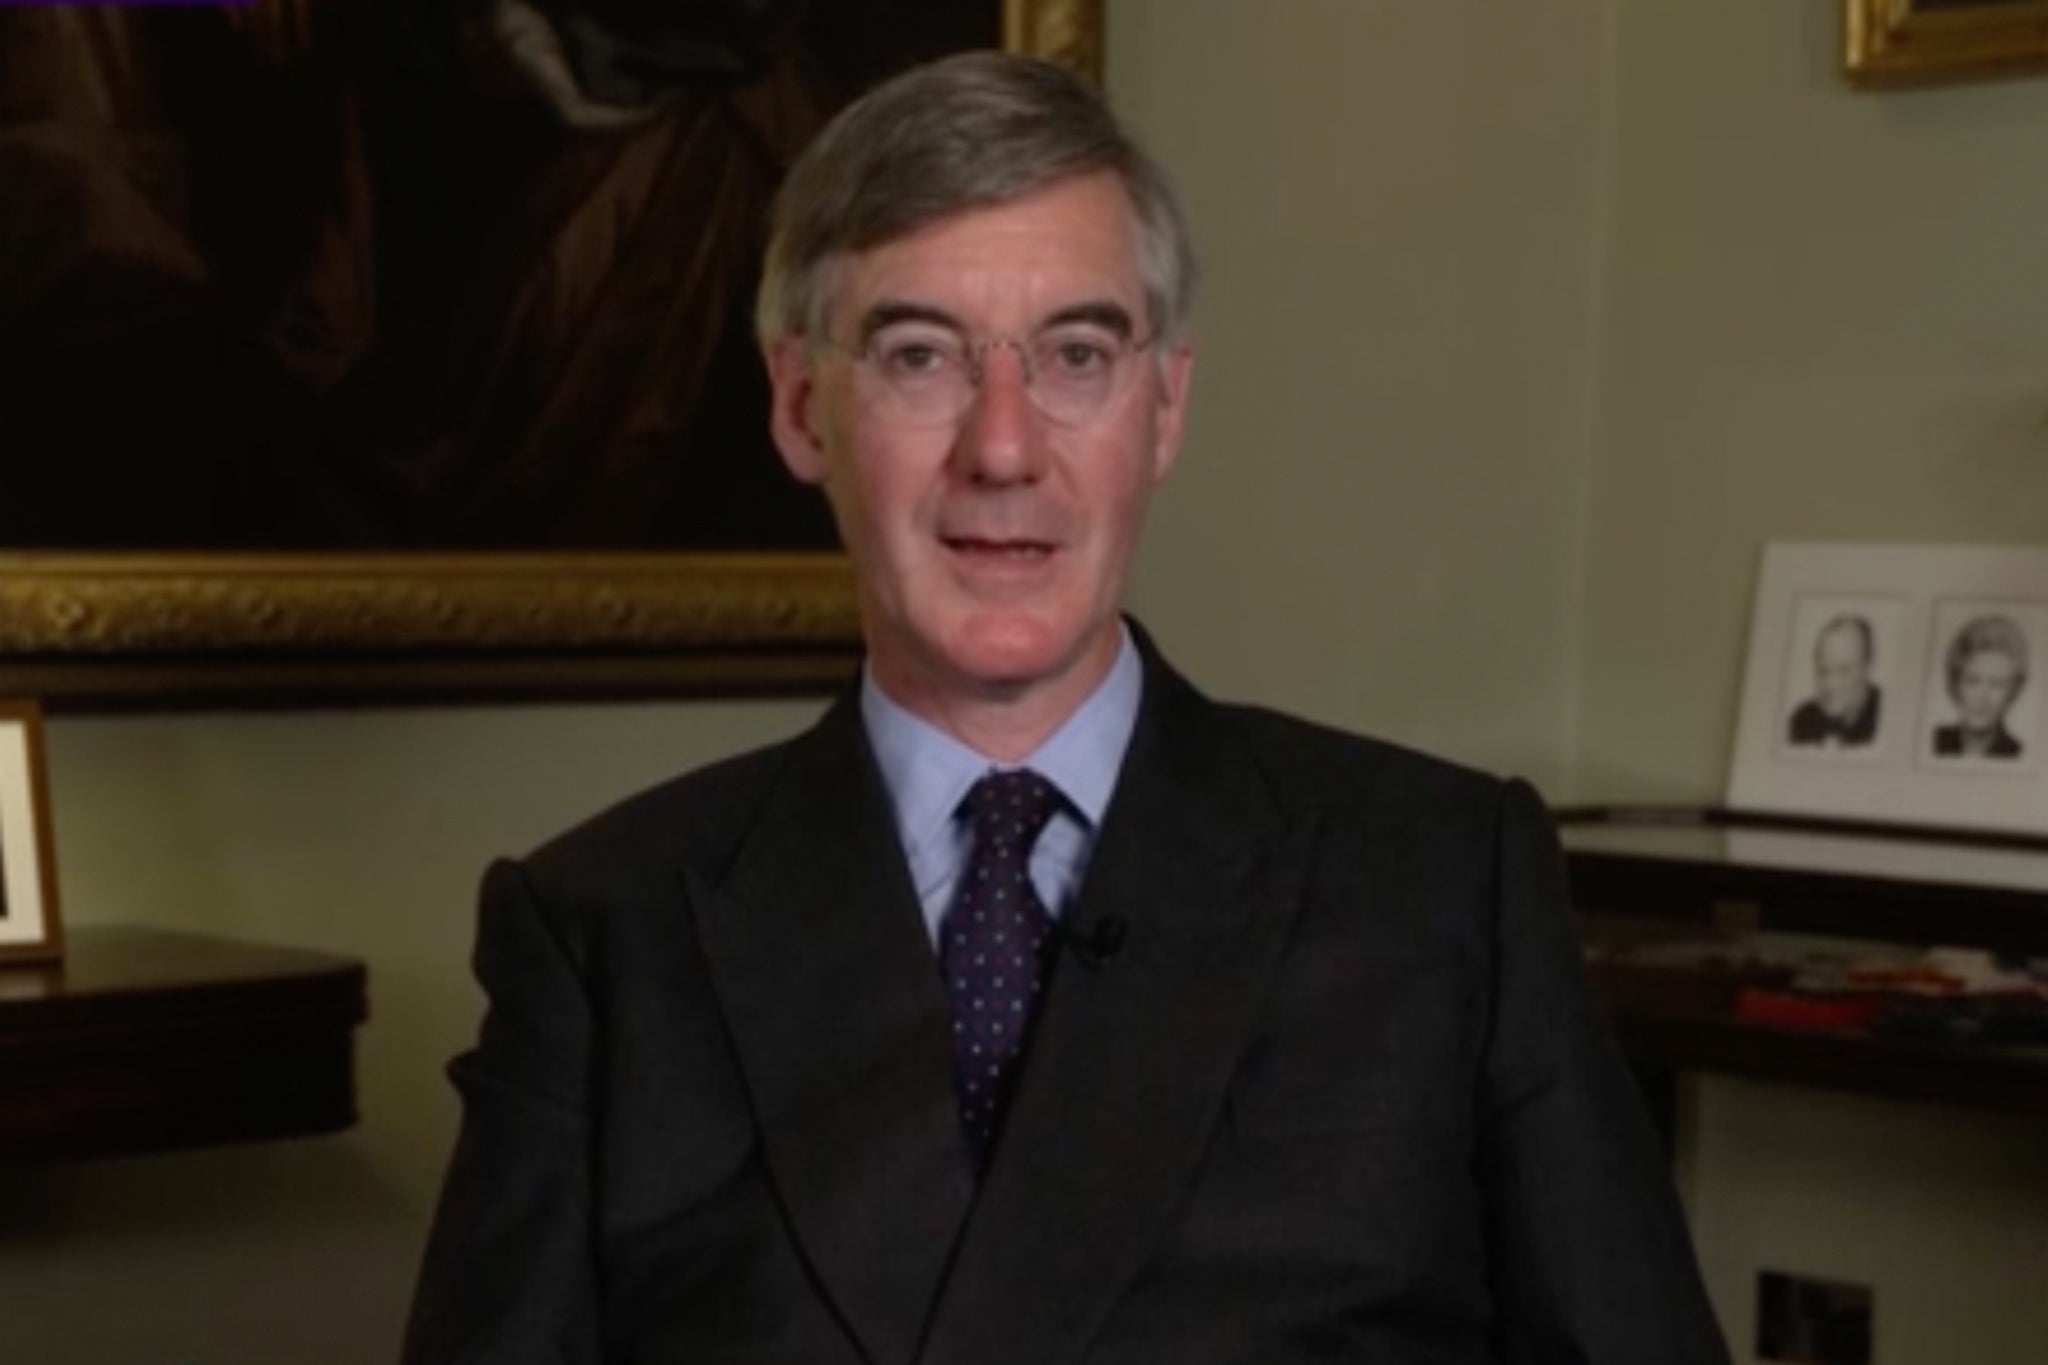 Jacob Rees-Mogg has accepted it is a ‘terrible night’ for the Tories